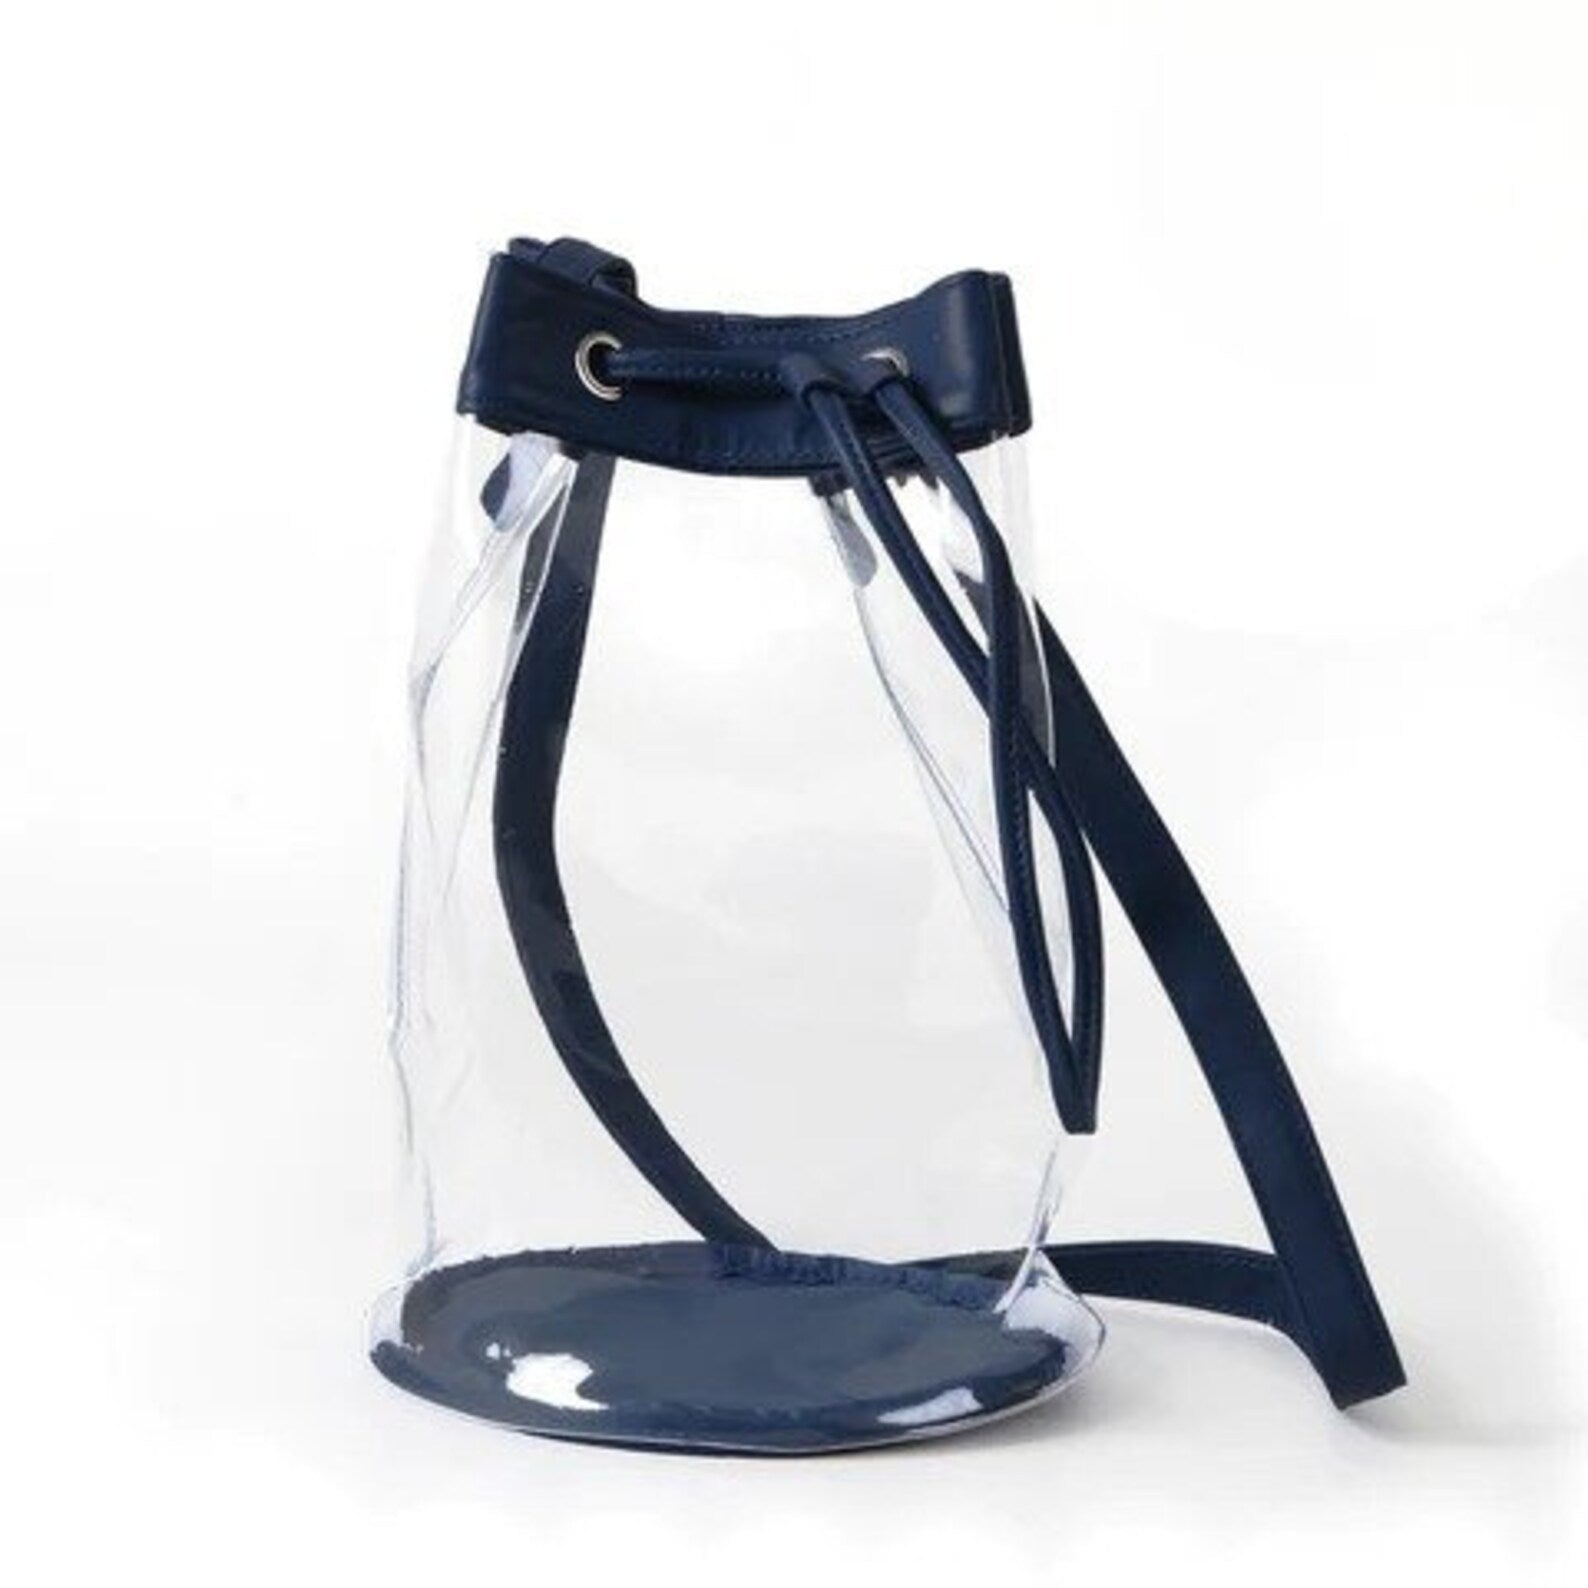 Stadium Approved Clear Bucket Bag - Navy Trim